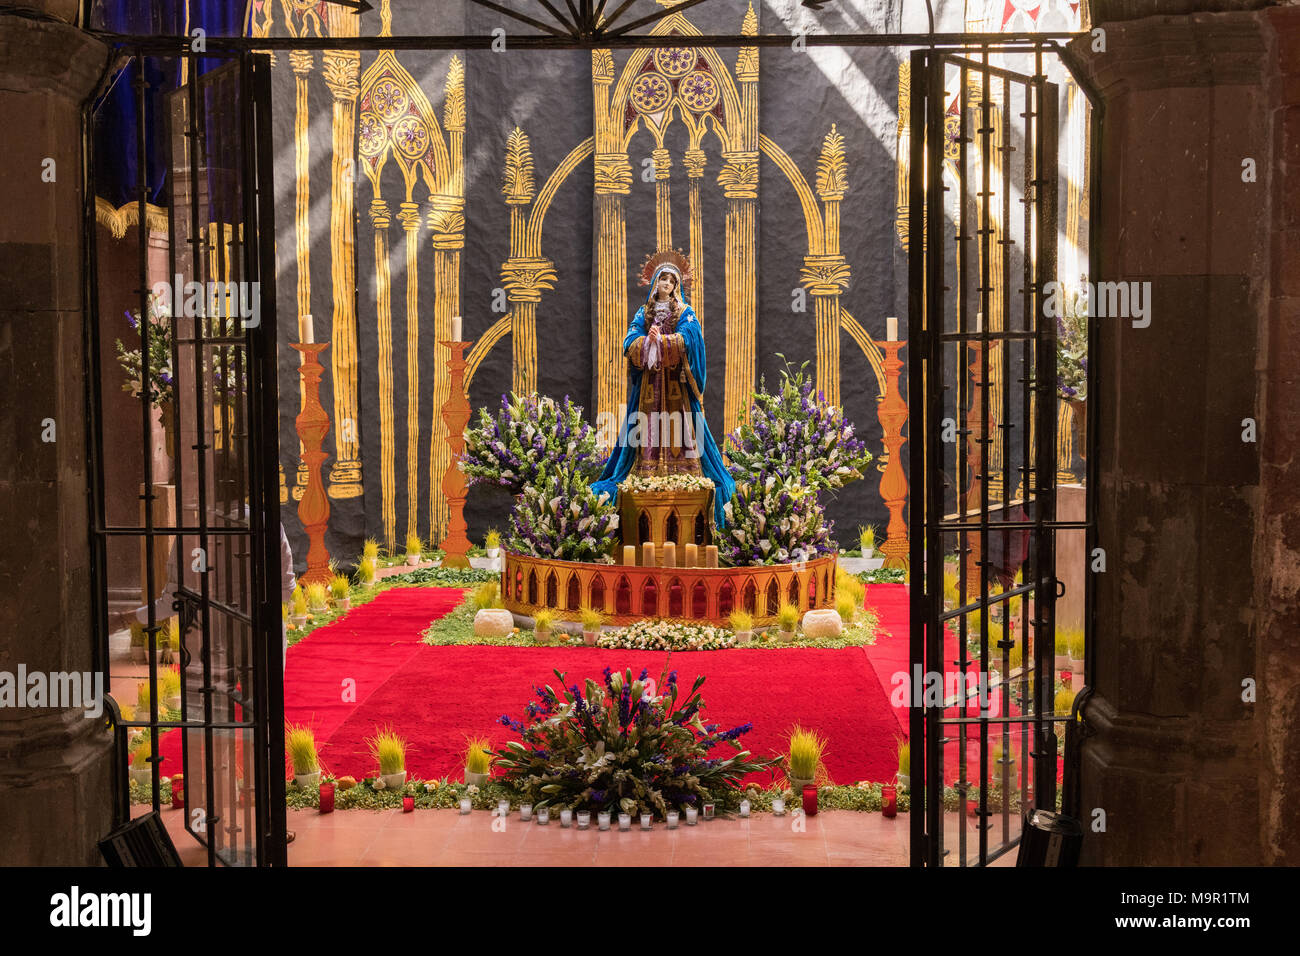 An altar celebrating El Viernes de Dolores during Holy Week March 23, 2018 in San Miguel de Allende, Mexico. The event honors the sorrow of the Virgin Mary for the death of her son and is an annual tradition in central Mexico. Stock Photo